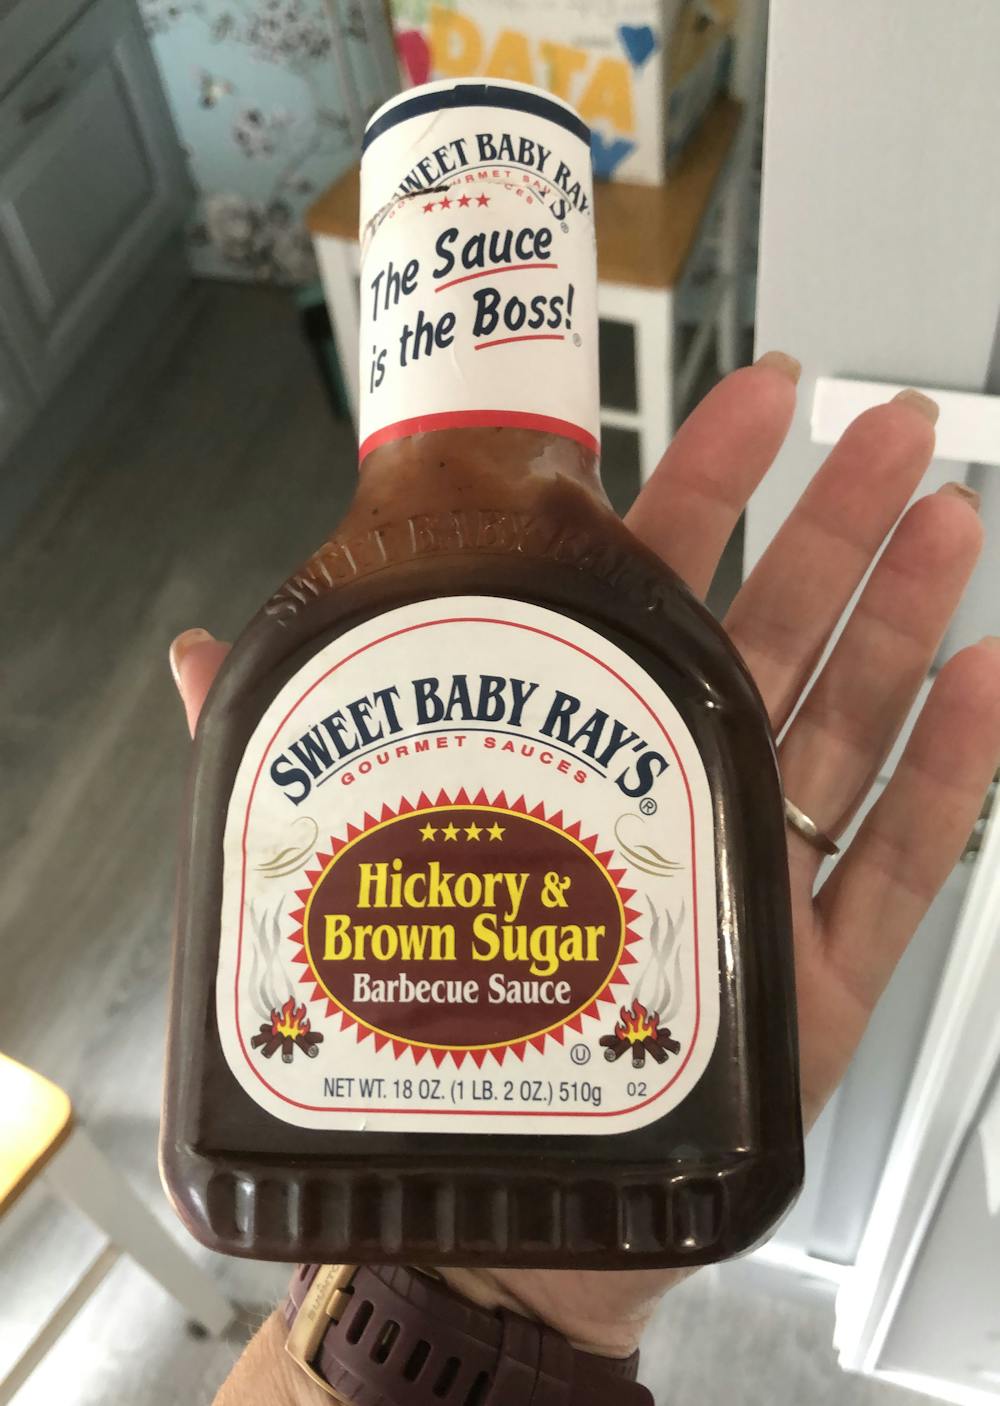 Hickory & brown sugar barbecue sauce, Sweet baby ray's